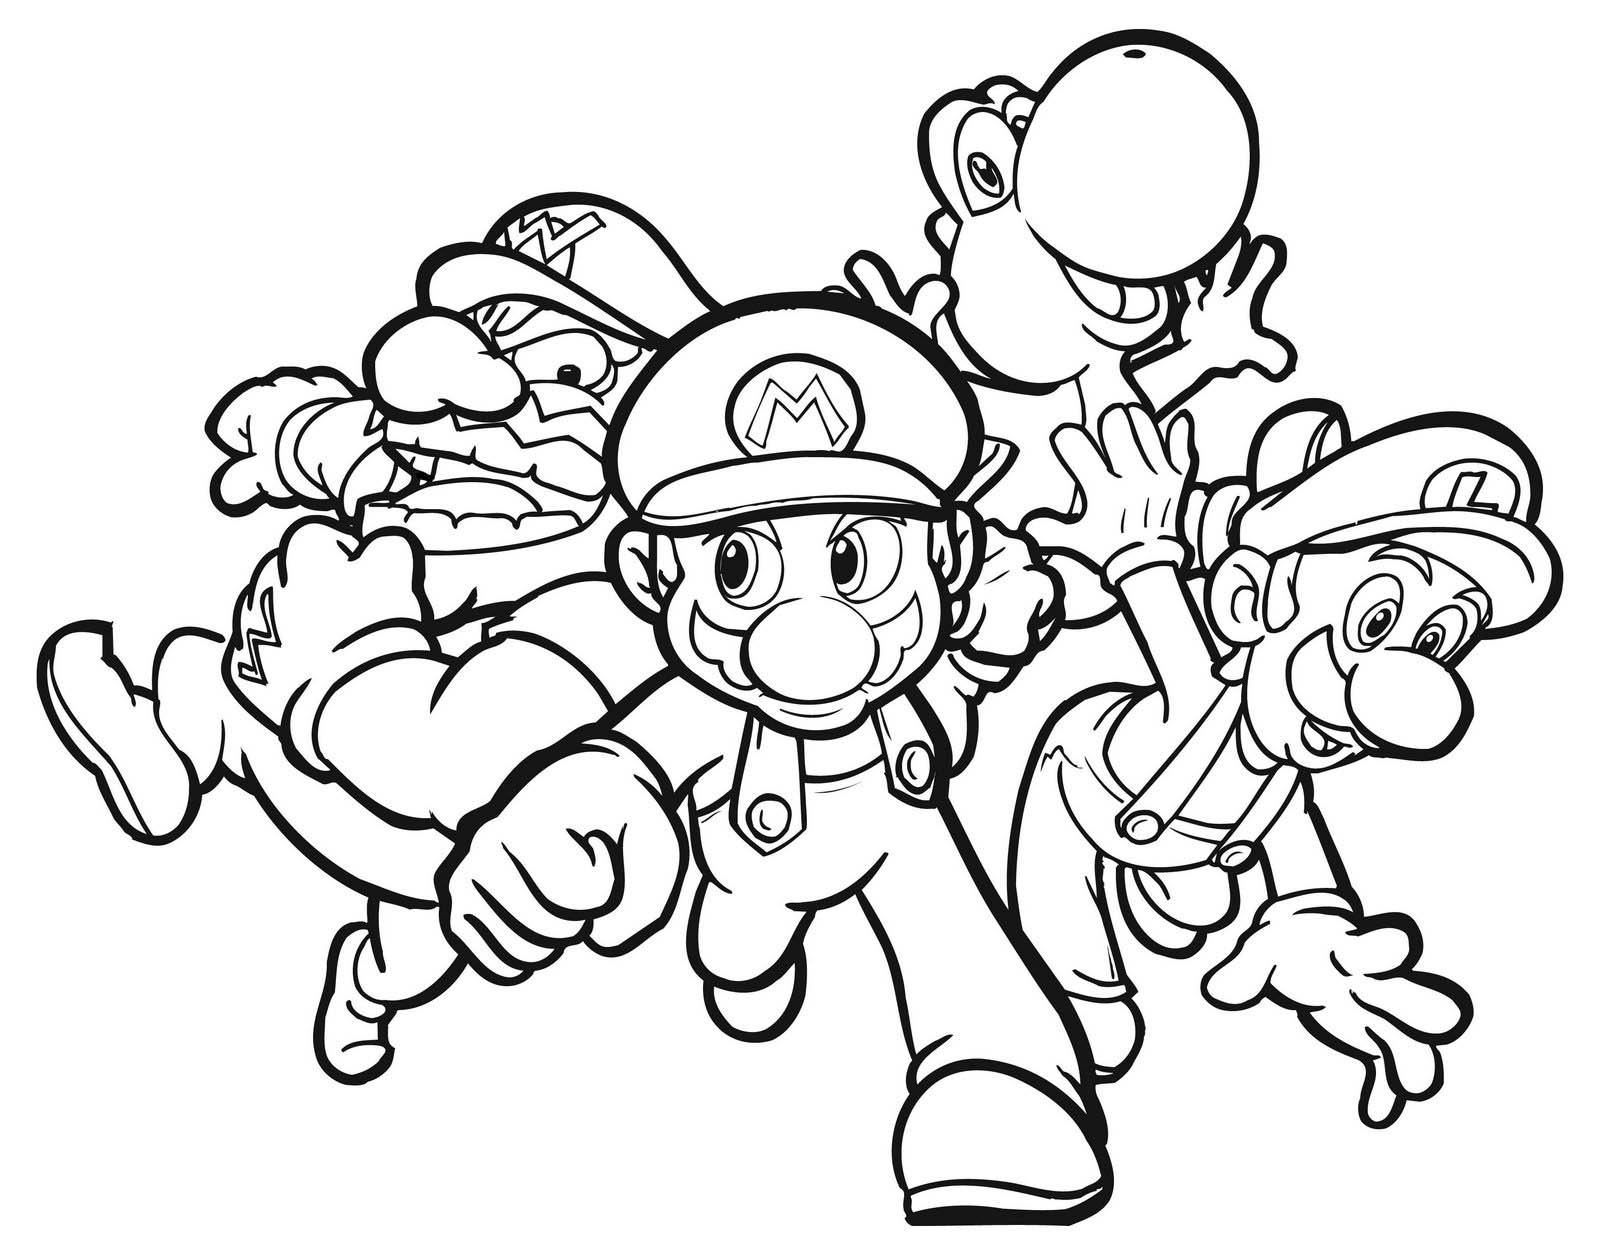  Super  Mario Coloring  Pages Free Printable Coloring  Pages 